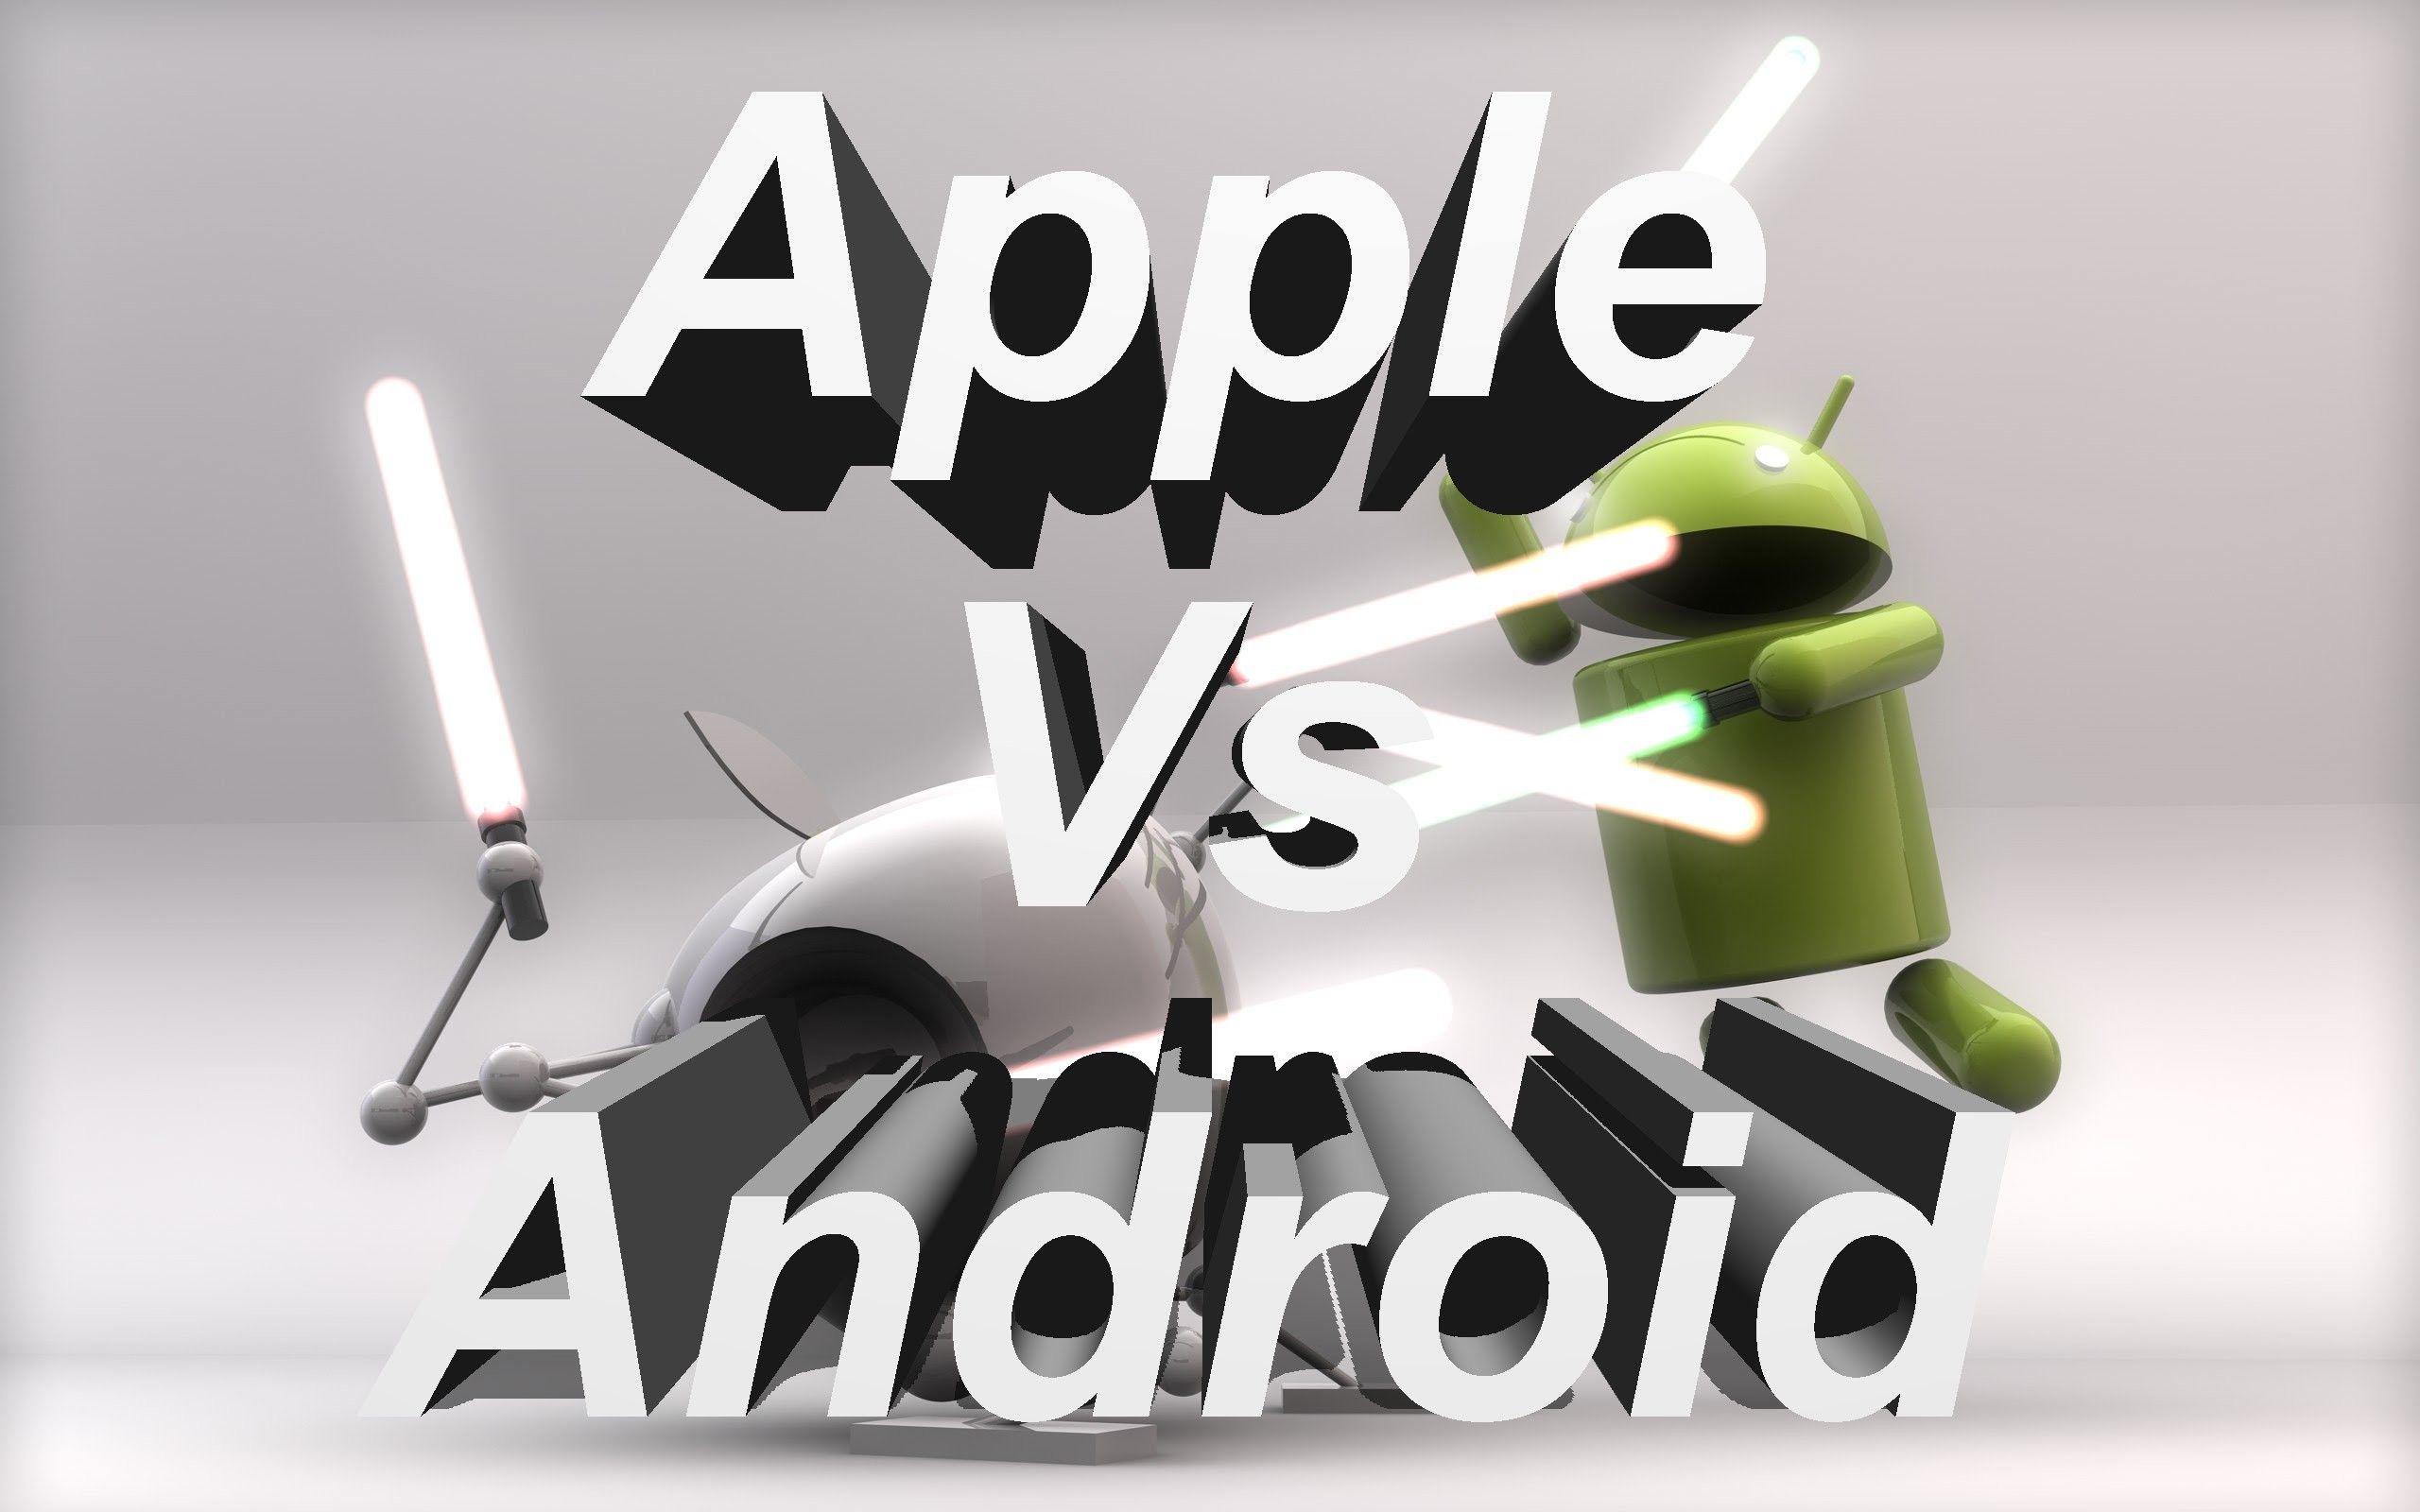 3d Wallpaper Of Android Vs Apple - Android Vs Apple - HD Wallpaper 